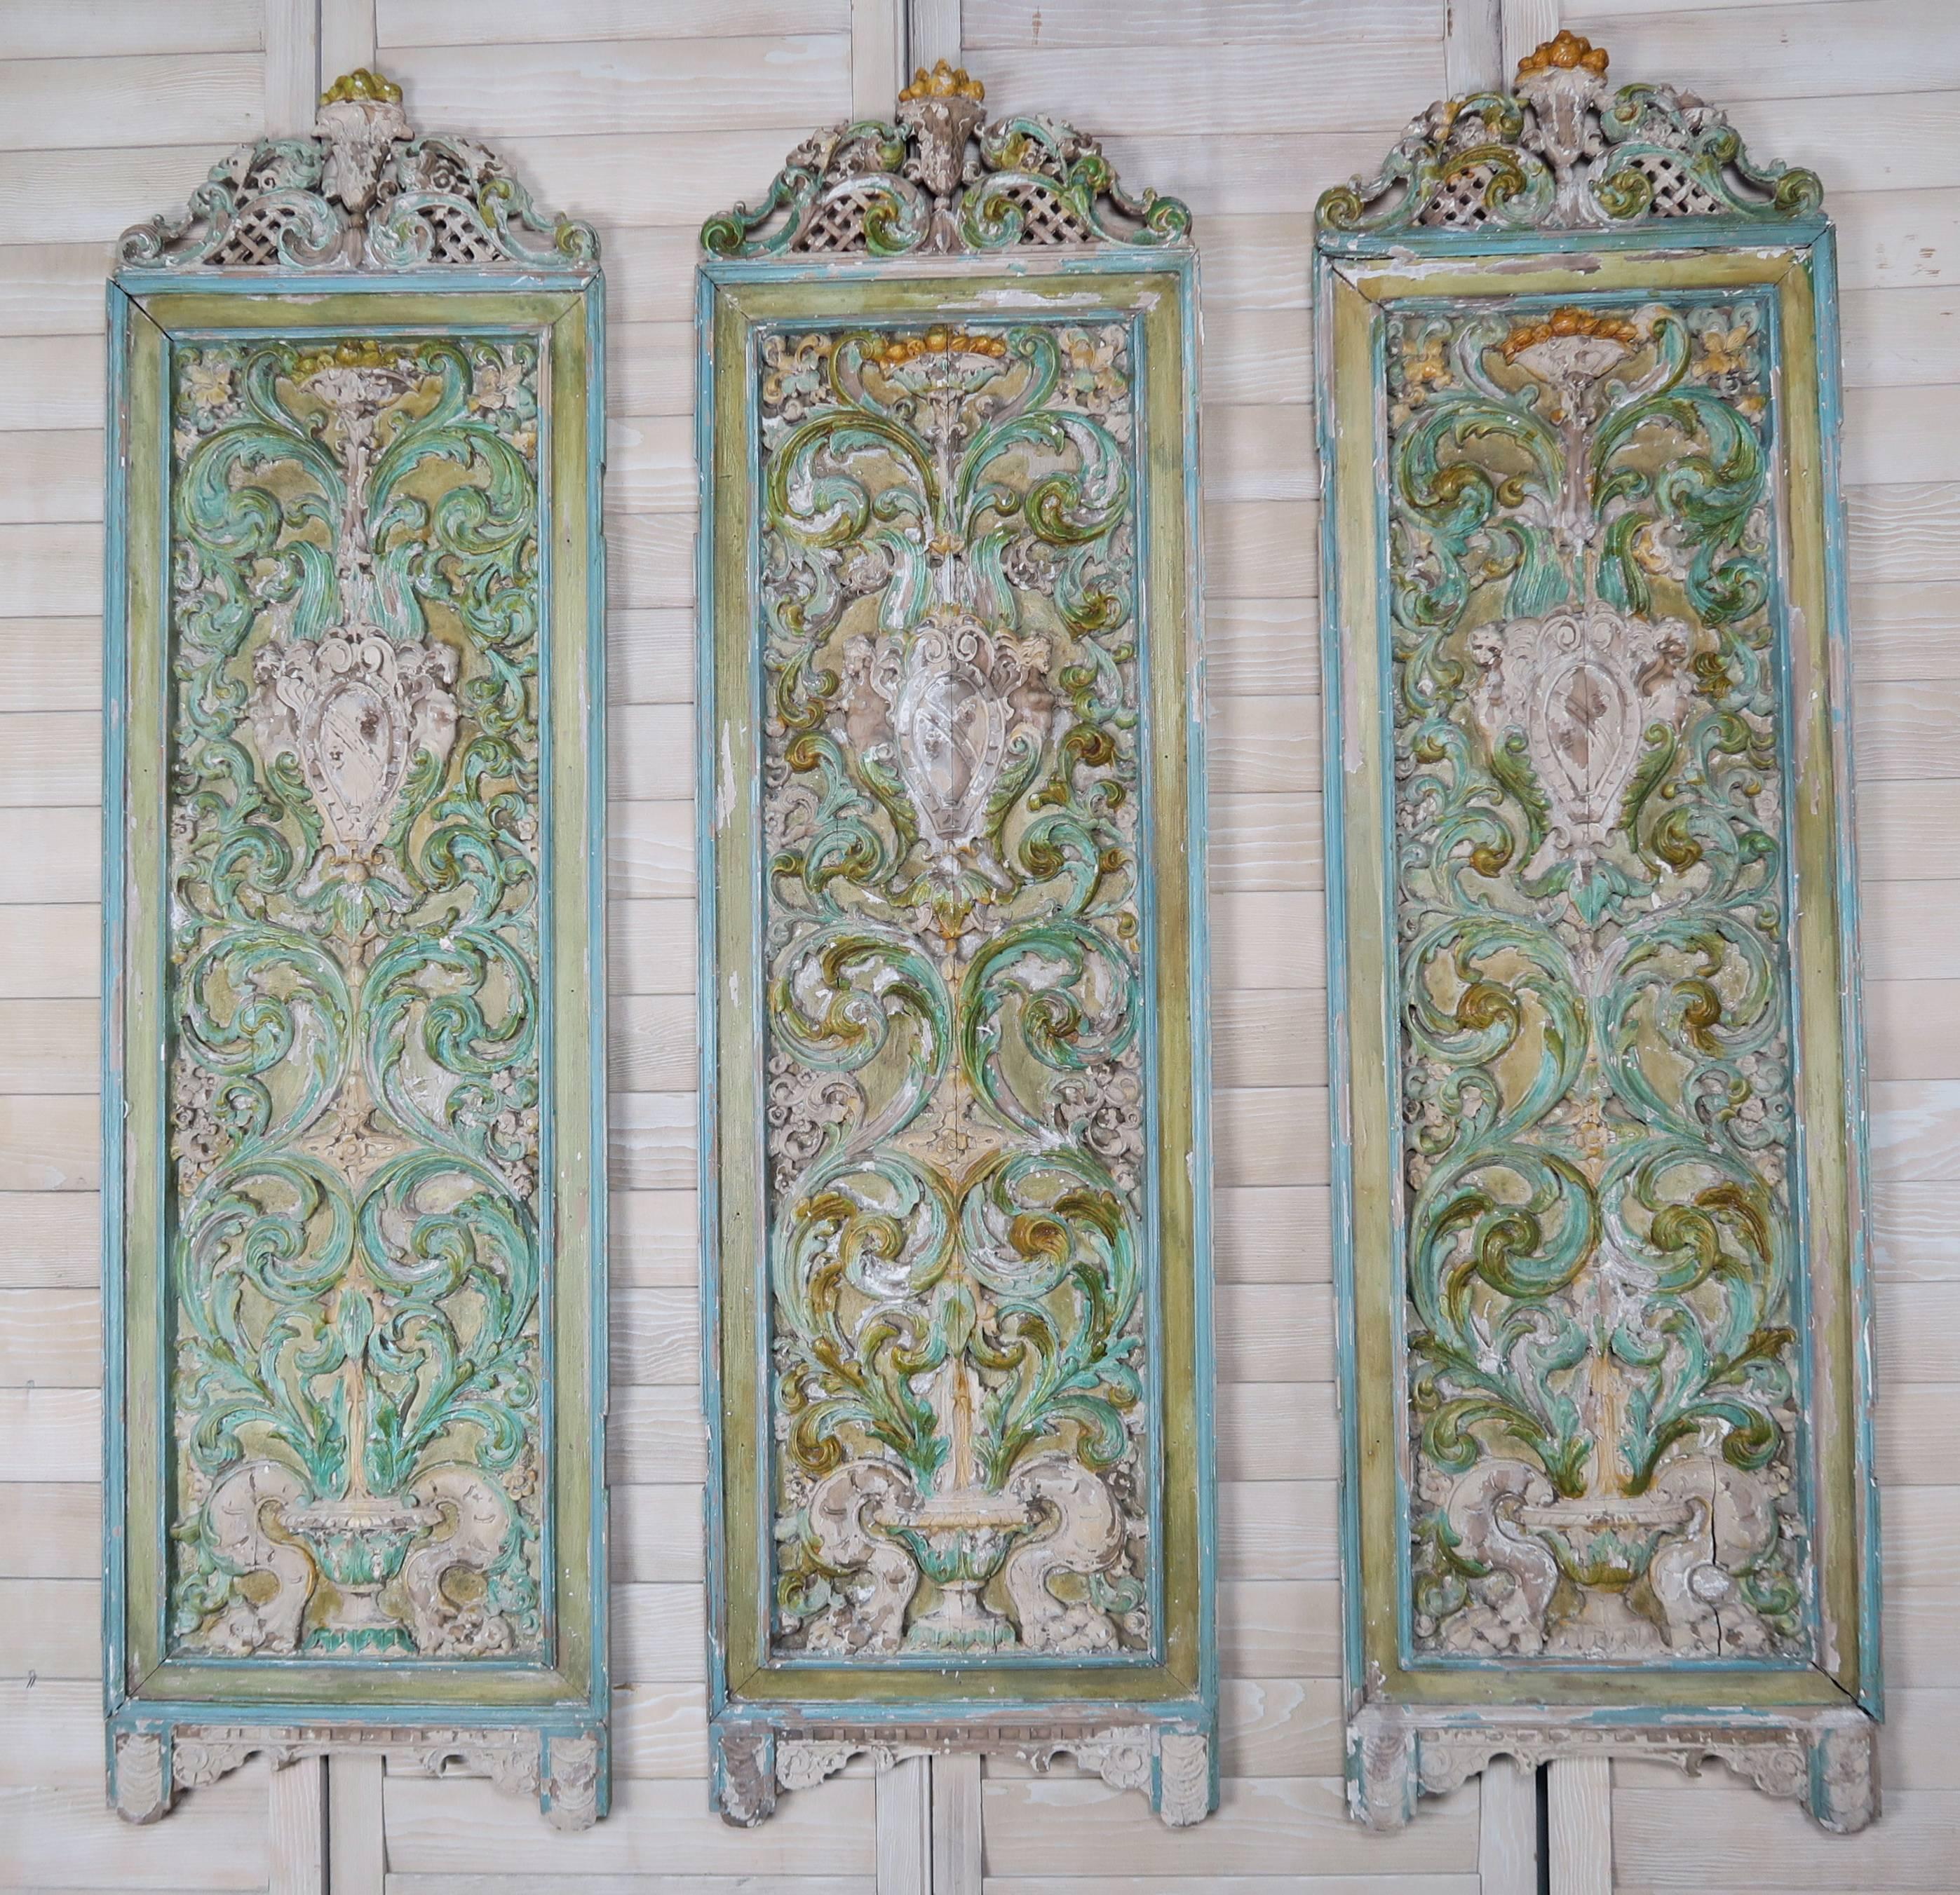 19th century Italian carved and painted 3-panel screen.  The intricate carving depicts urns with swirling acanthus leaves throughout.  Beautiful shades of greens, blues & golds.  